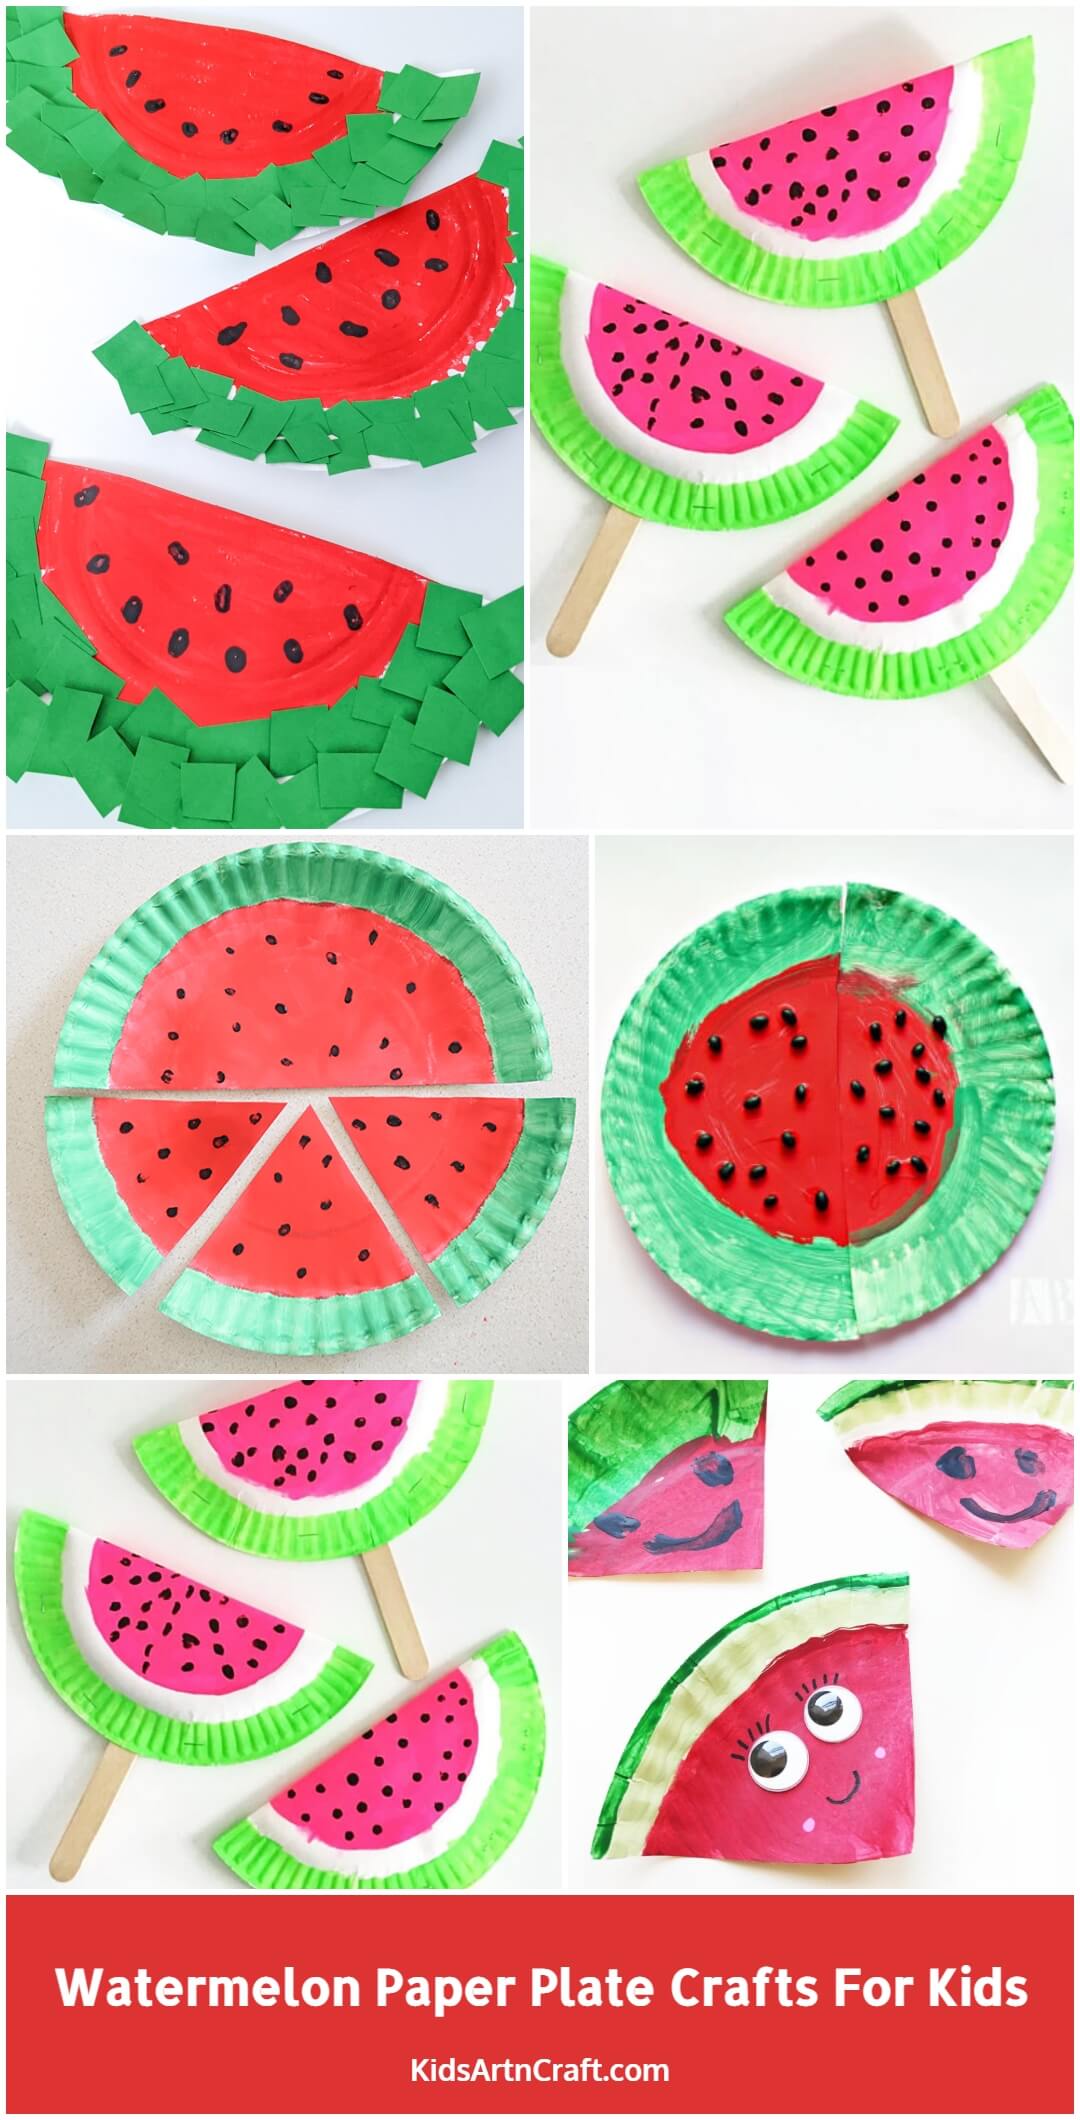  Watermelon Paper Plate Crafts for Kids